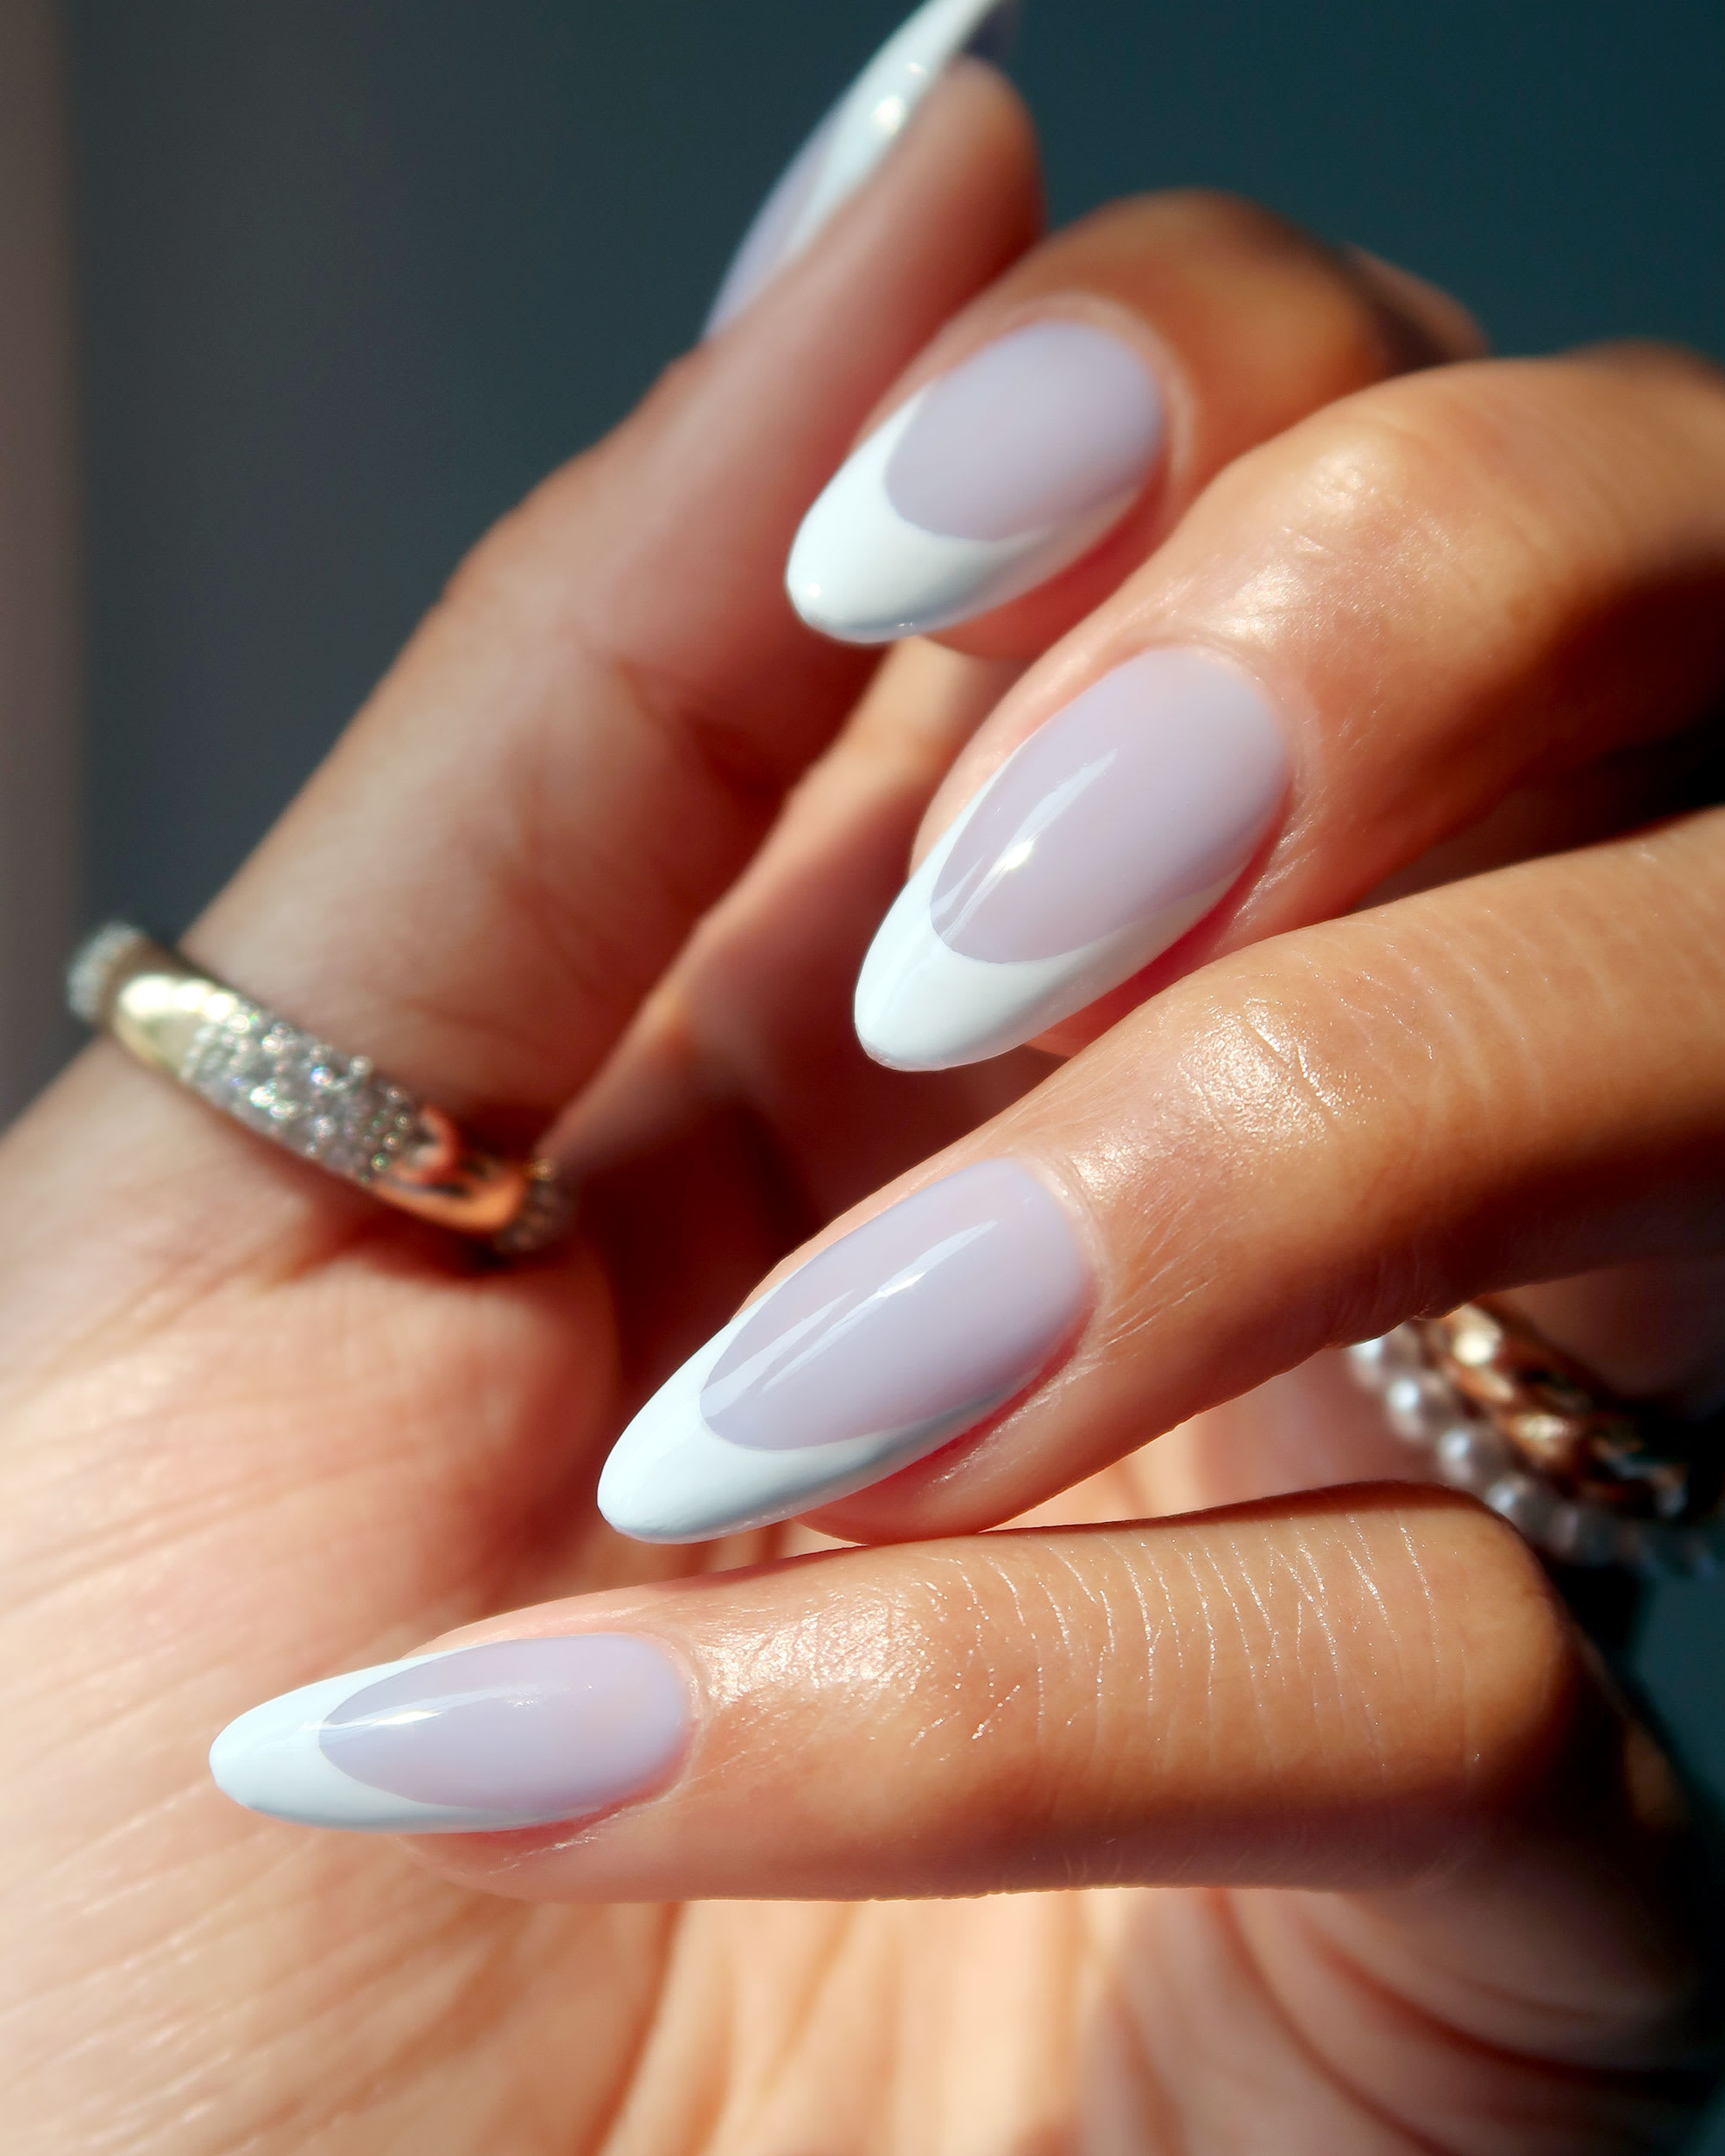 A white and bright nail look is... - Venus Nails & Spa | Facebook